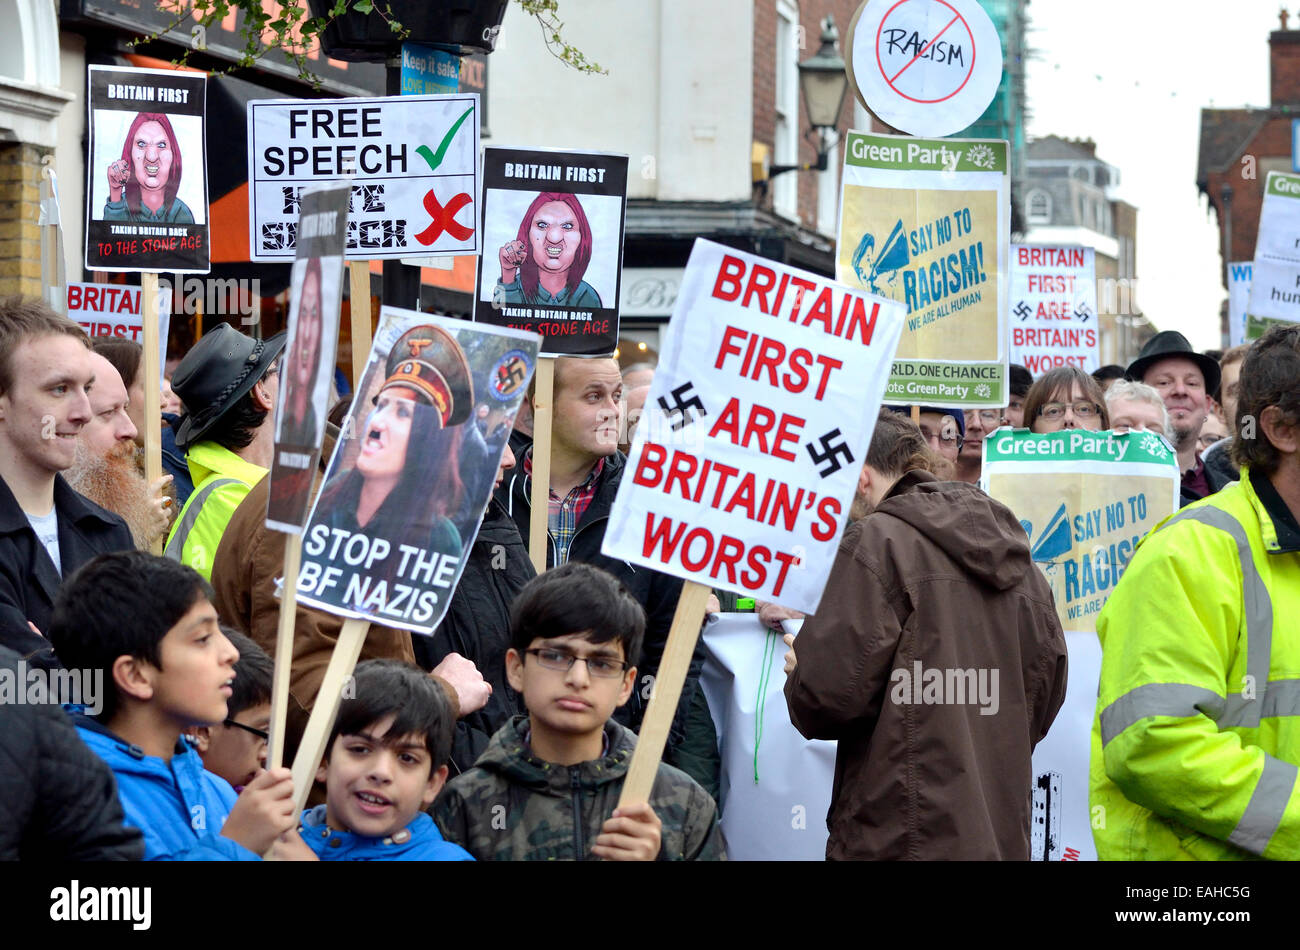 Rochester, UK. 15th November, 2014. Approximately 25-30 Britain First supporters including Paul Golding and their Parliamentary Candidate Jayda Fransen march down Rochester High Street meeting many more counter protesters. Stock Photo